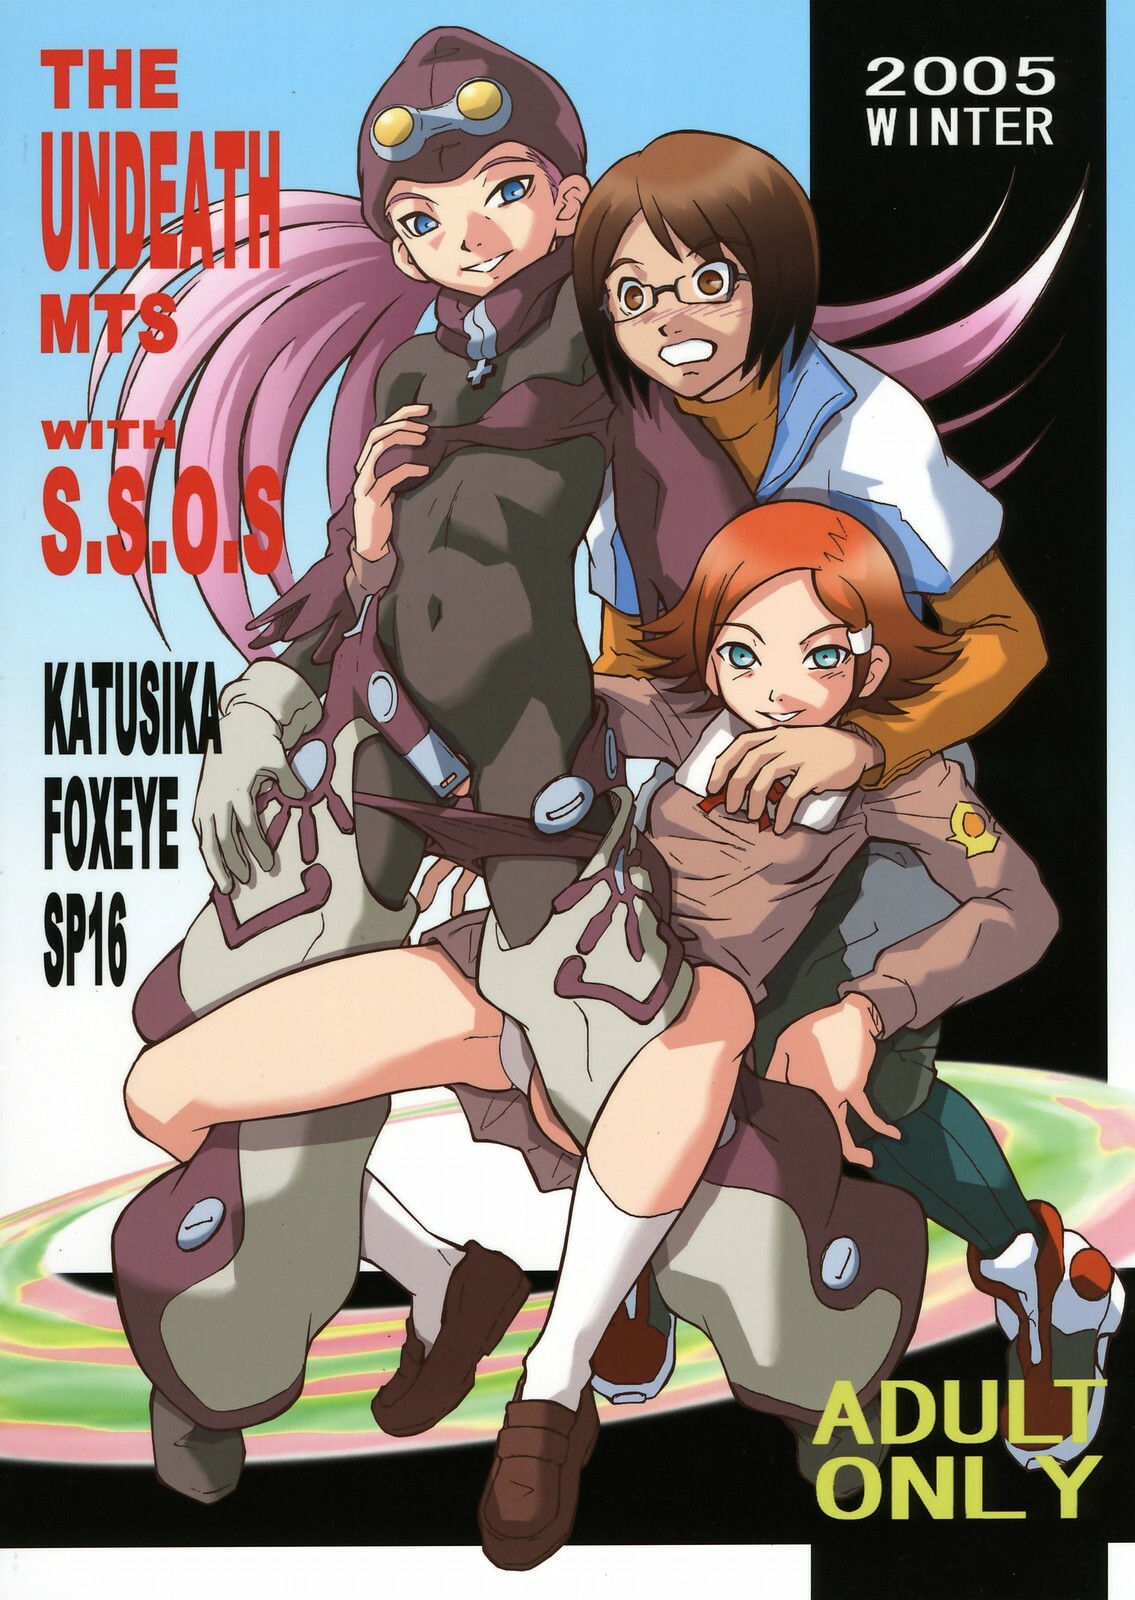 [THE UNDEATH MTS and S.S.O.S] Tip Taps Spec 2 (Eureka Seven) page 62 full